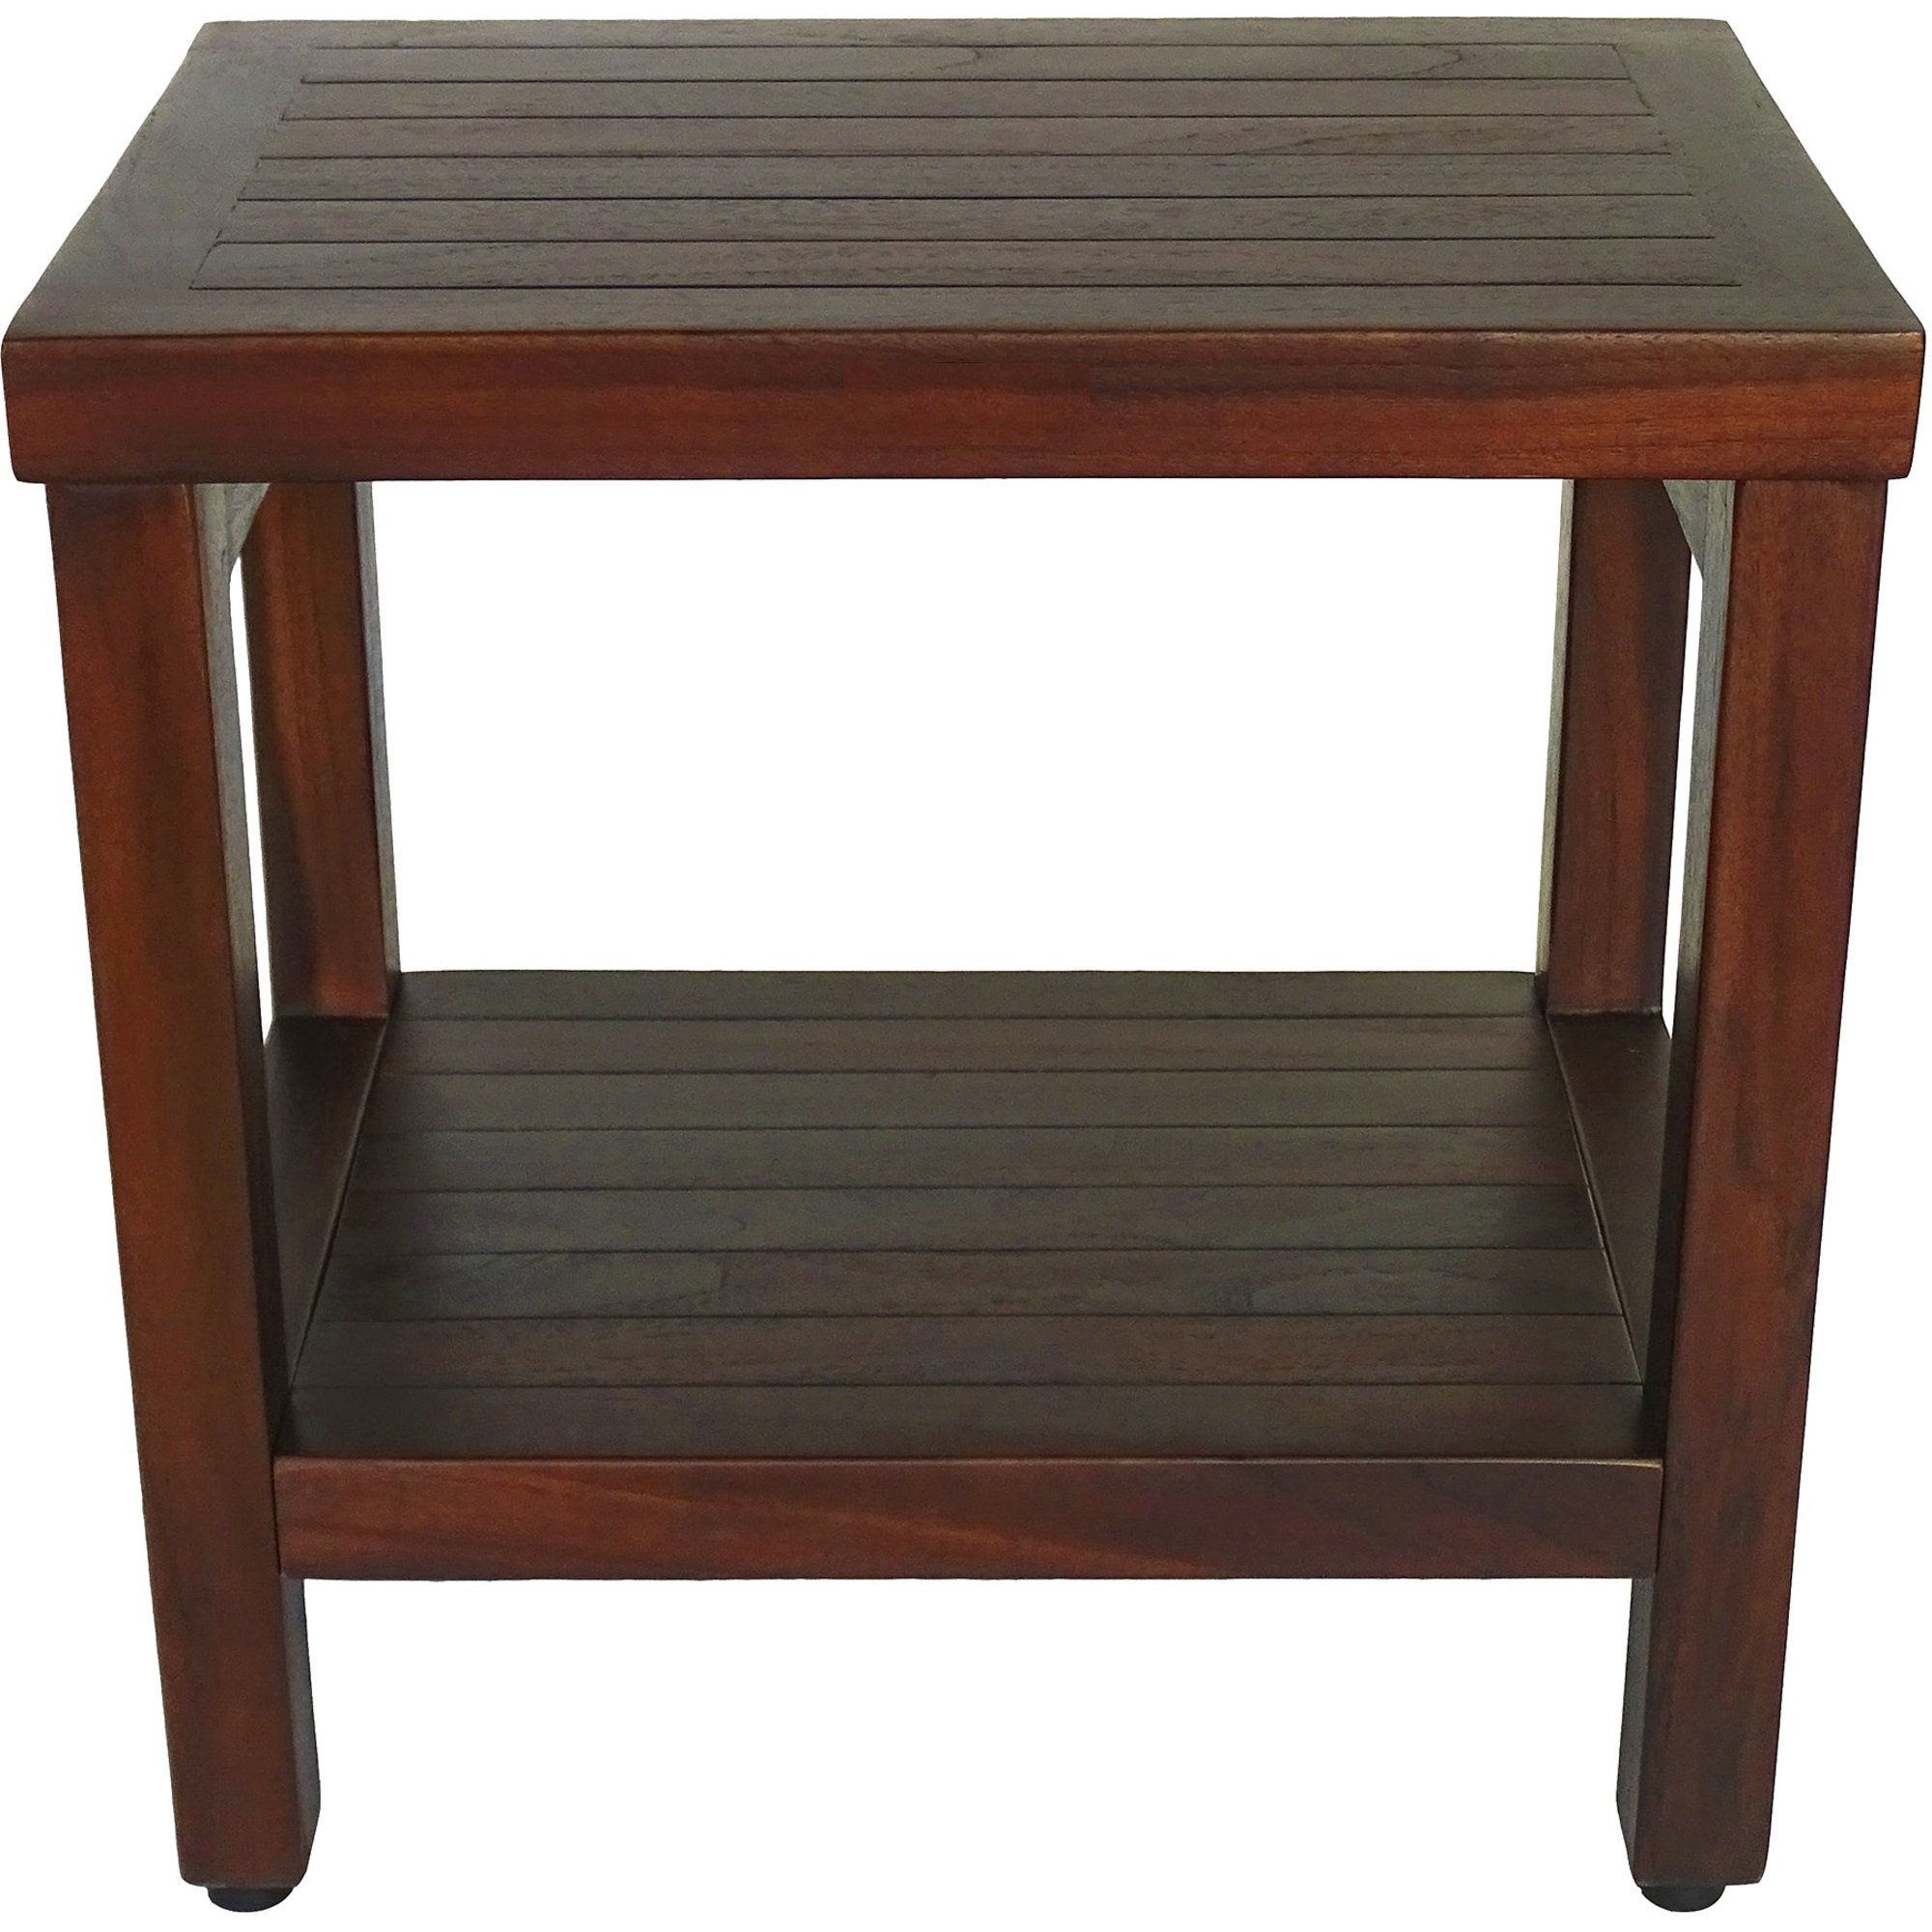 Compact Rectangular Teak Shower or Outdoor Bench with Shelf in Brown Finish